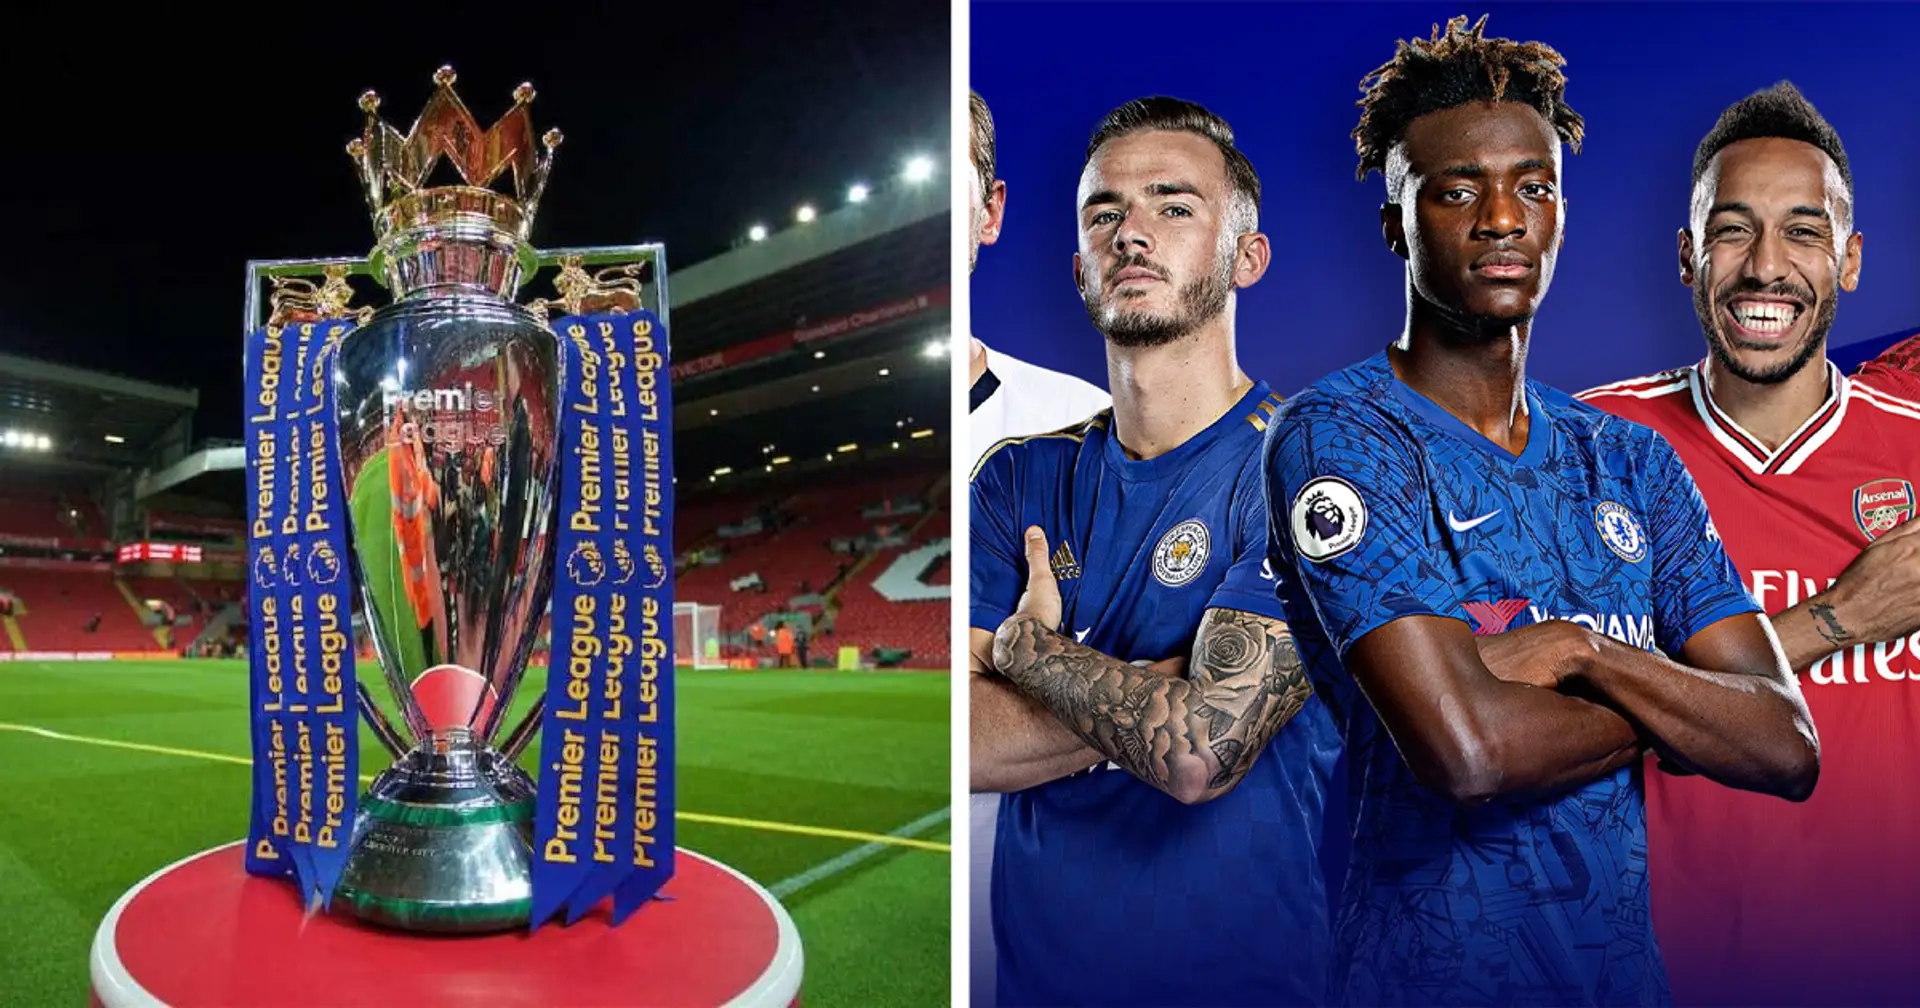 Sky Sports to kick off Premier League restart with Friday Night Football with full gameweek broadcast on TV